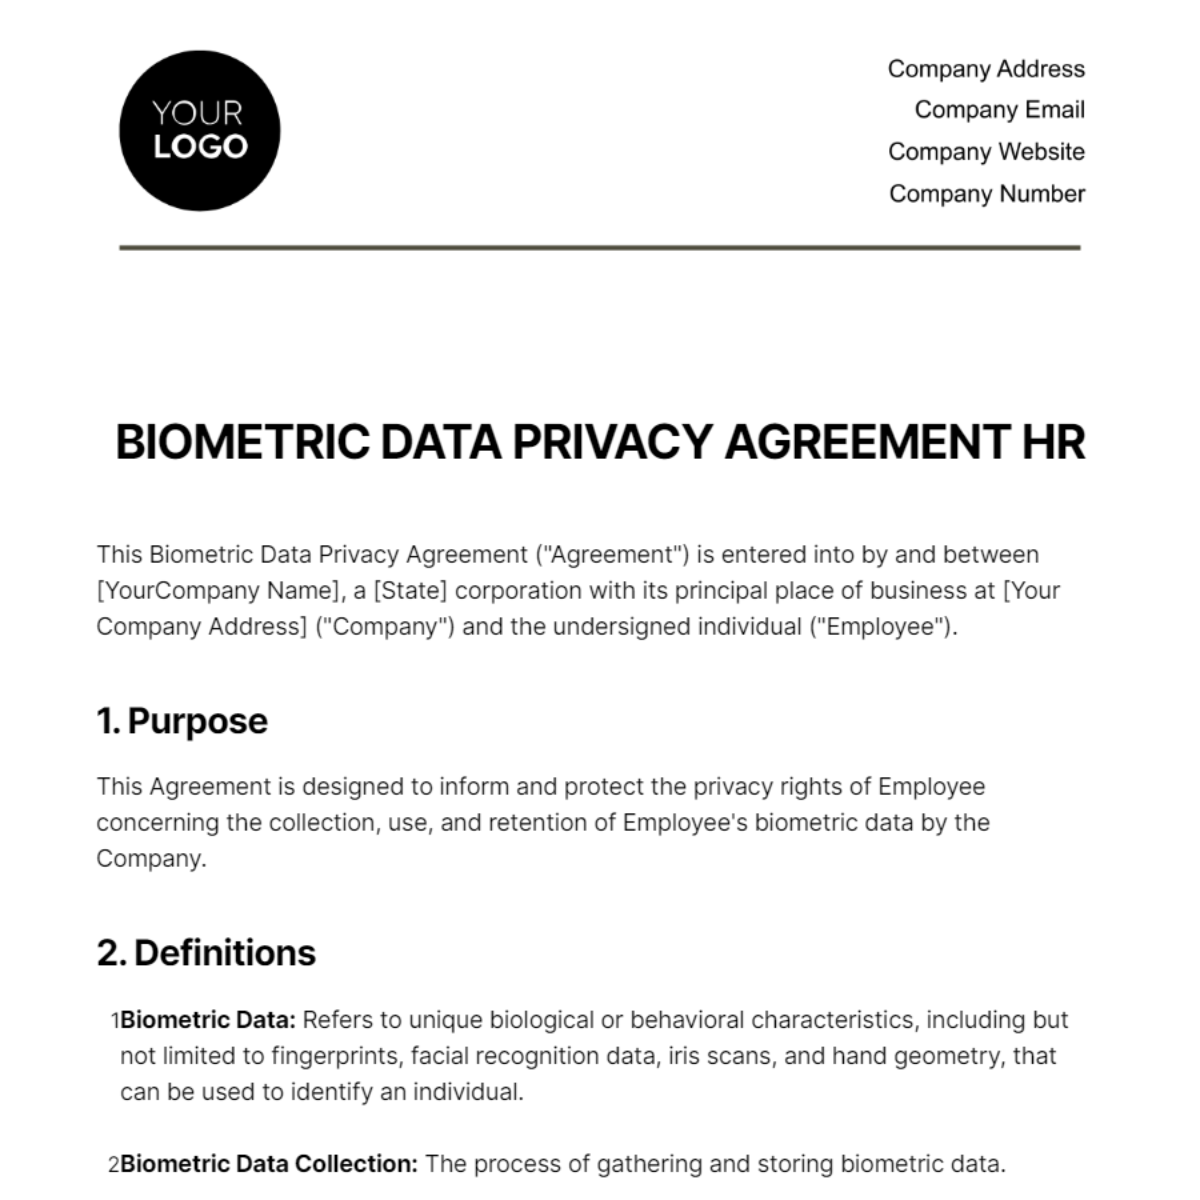 Free Biometric Data Privacy Agreement HR Template